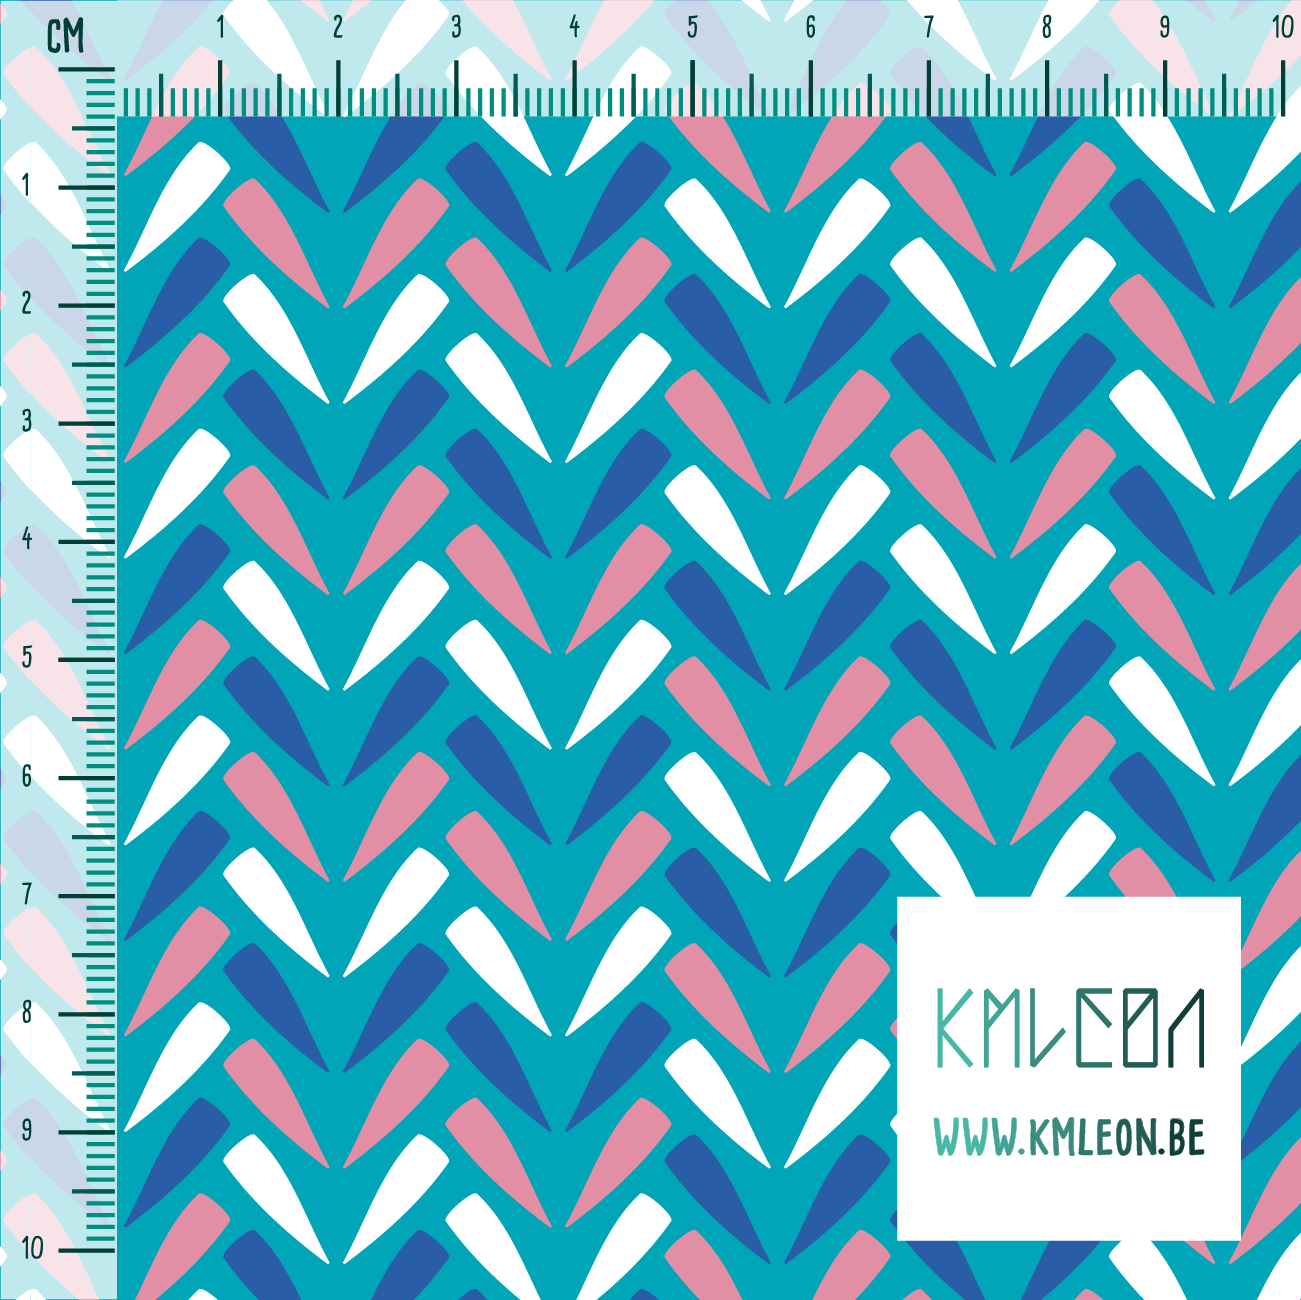 Blue, white and pink chevron fabric